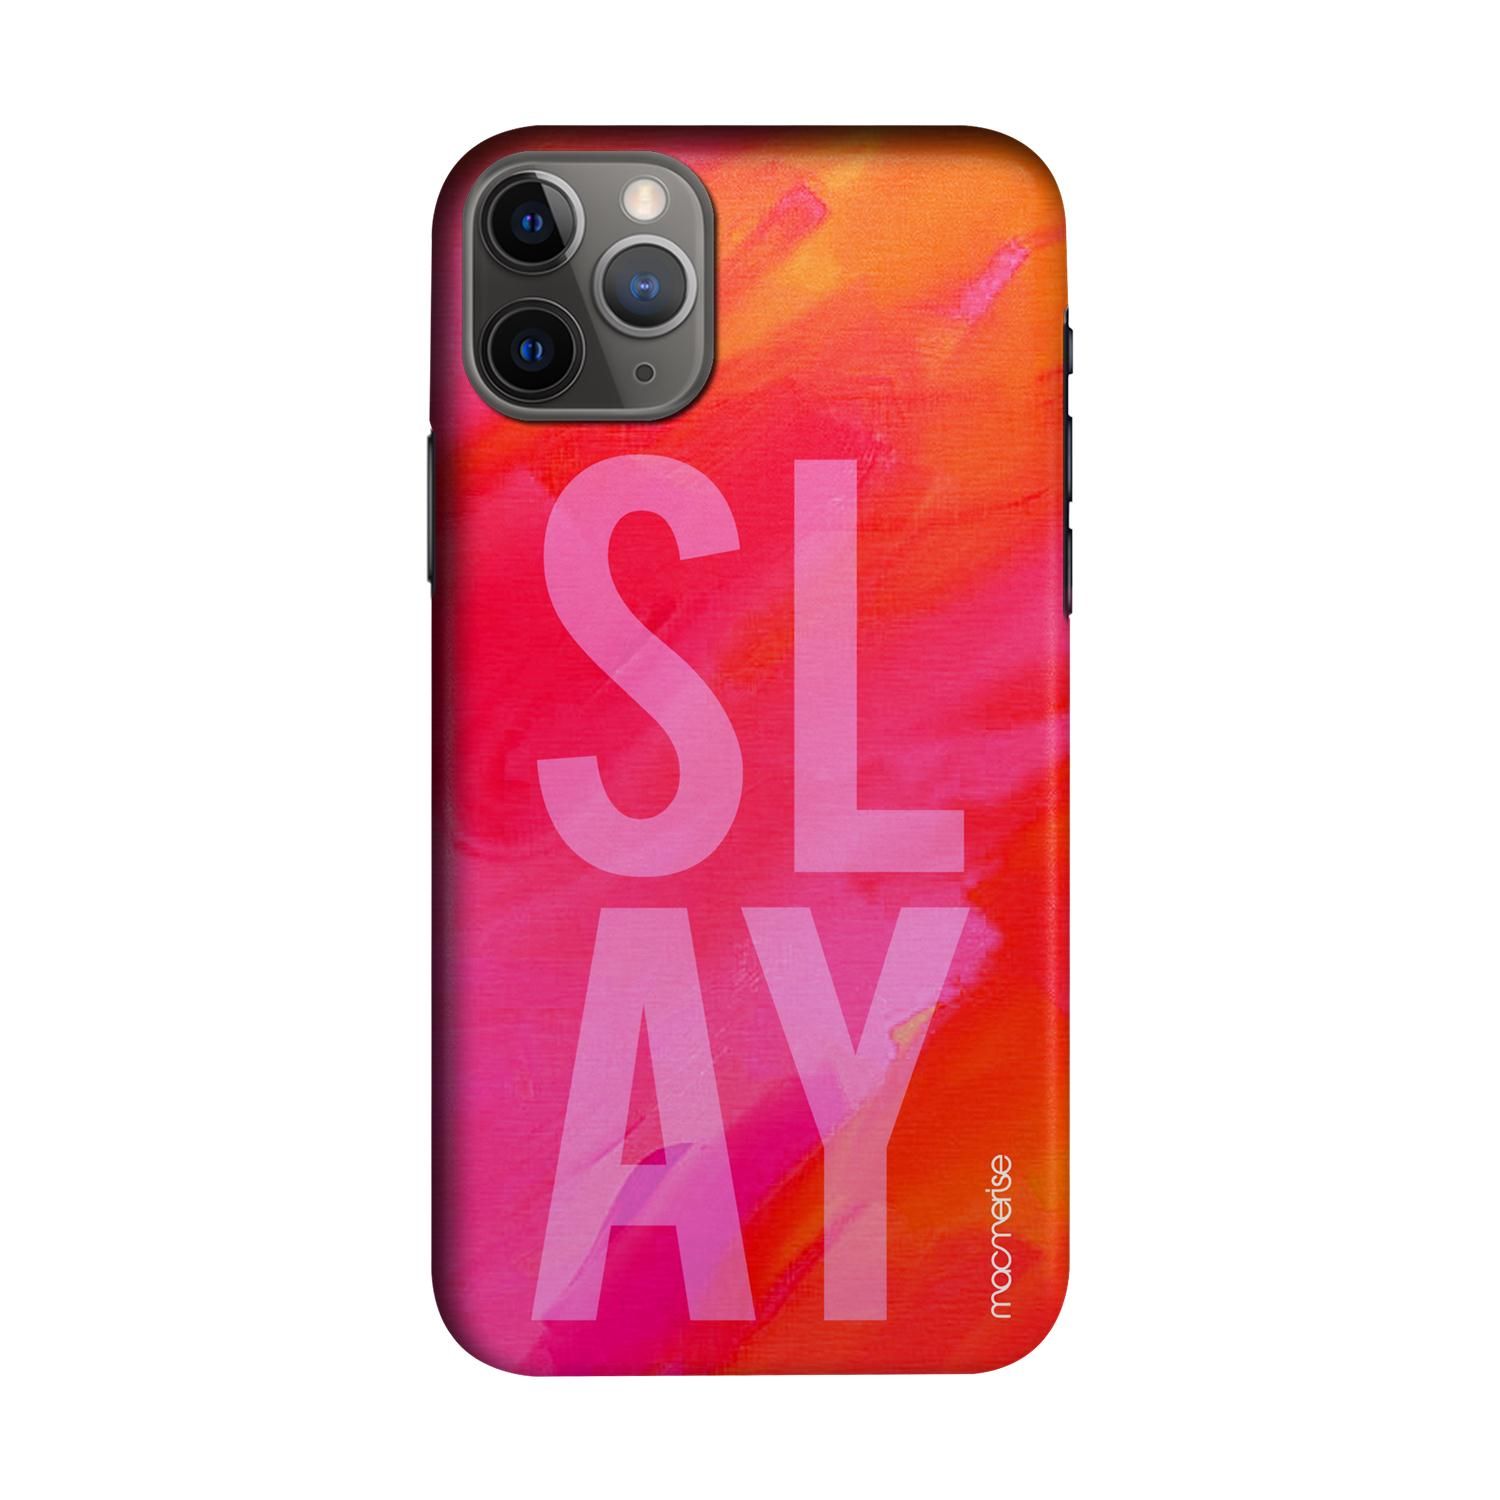 Slay Pink - Sleek Phone Case for iPhone 11 Pro Max